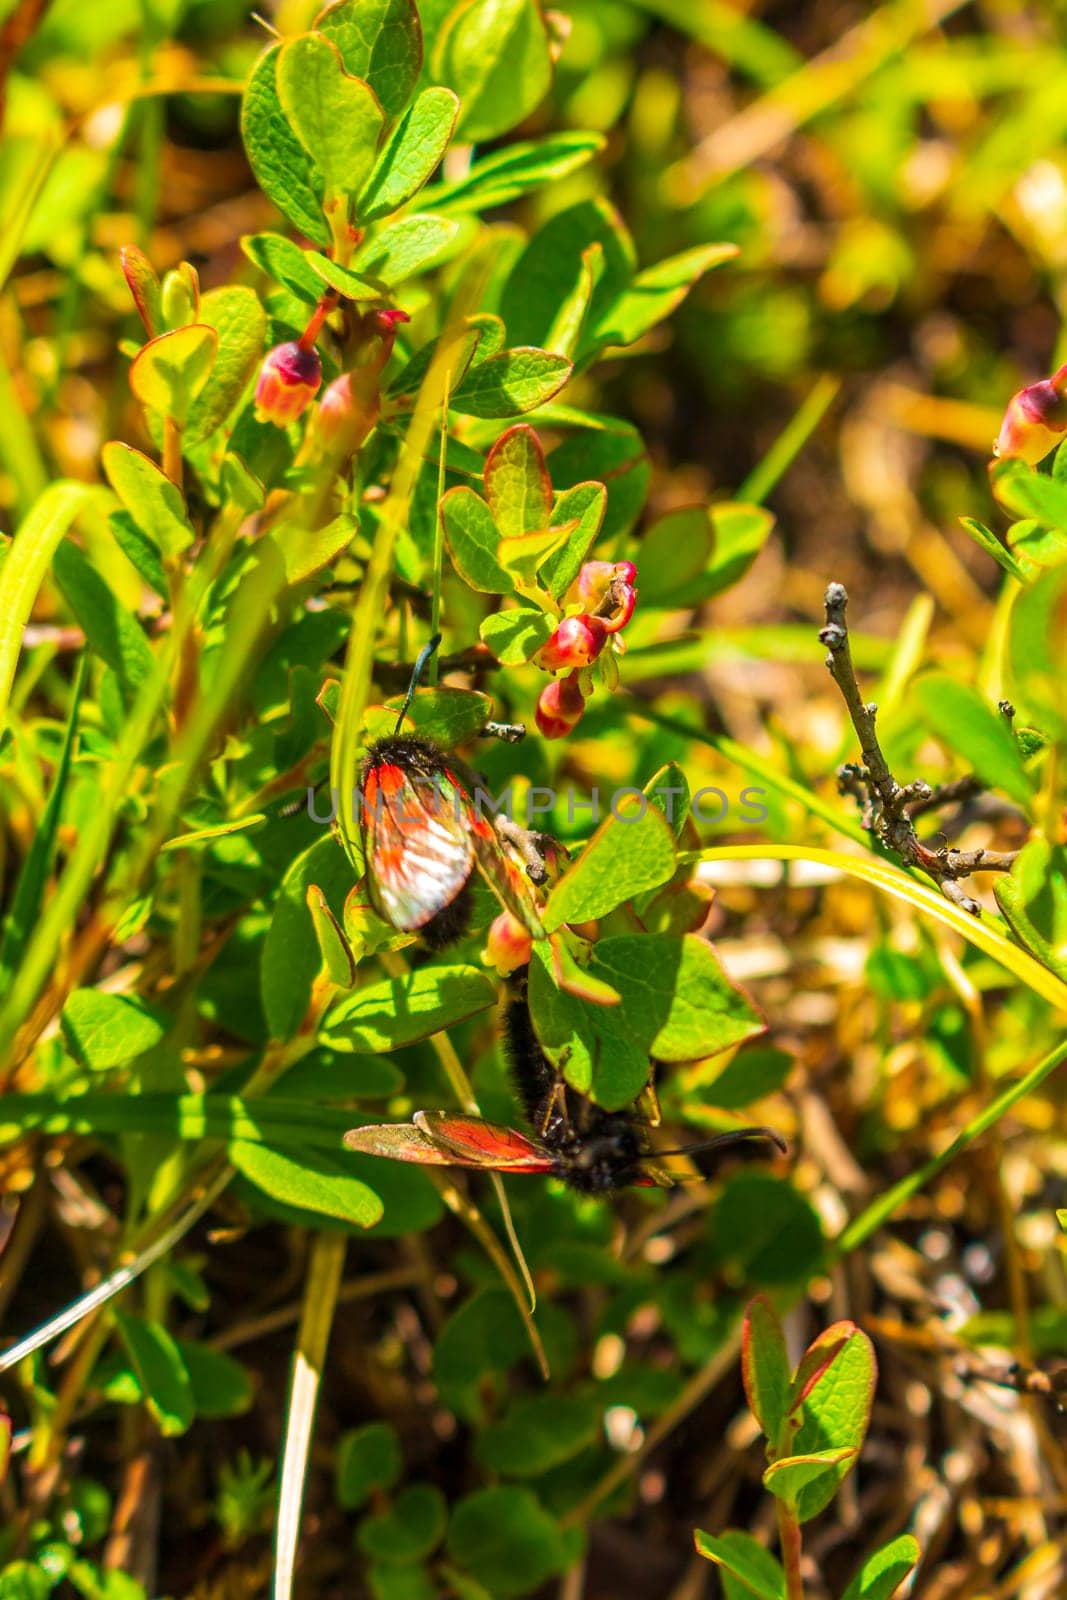 Rams bug Zygaena red insect wings Rondane National Park Norway. by Arkadij